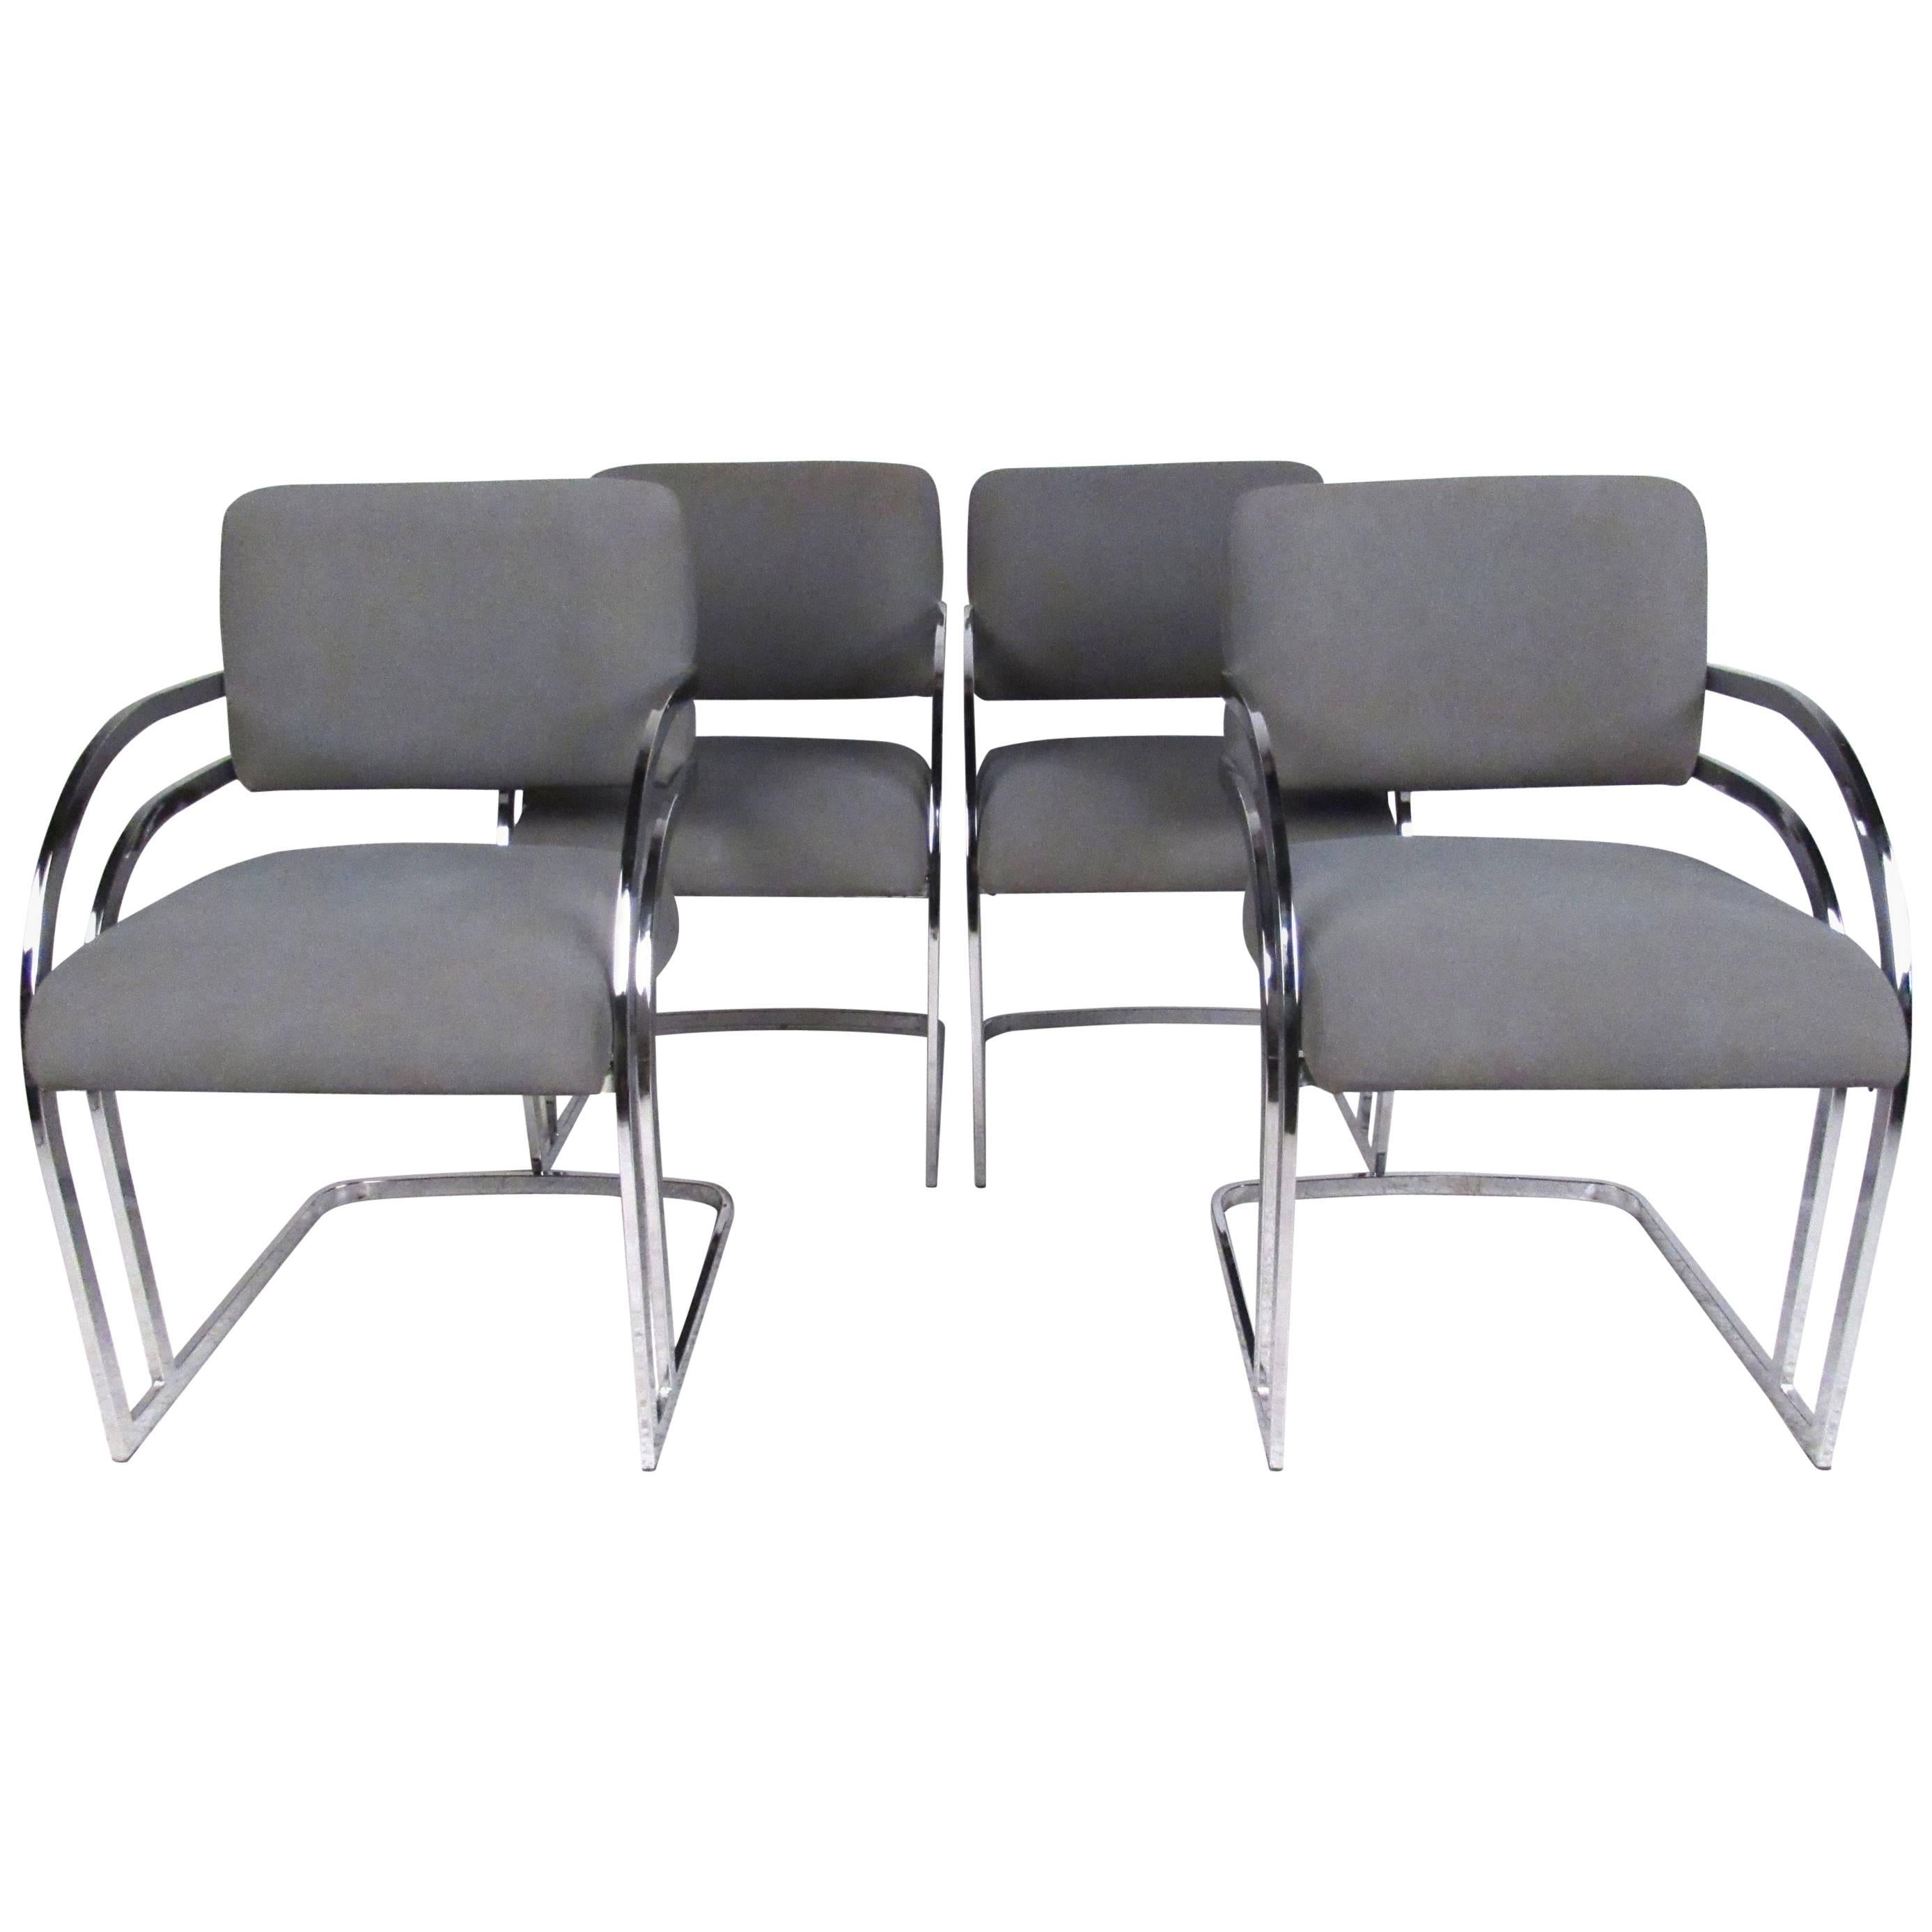 Set of Four Contemporary Shells Inc. Upholstered Dining Chairs